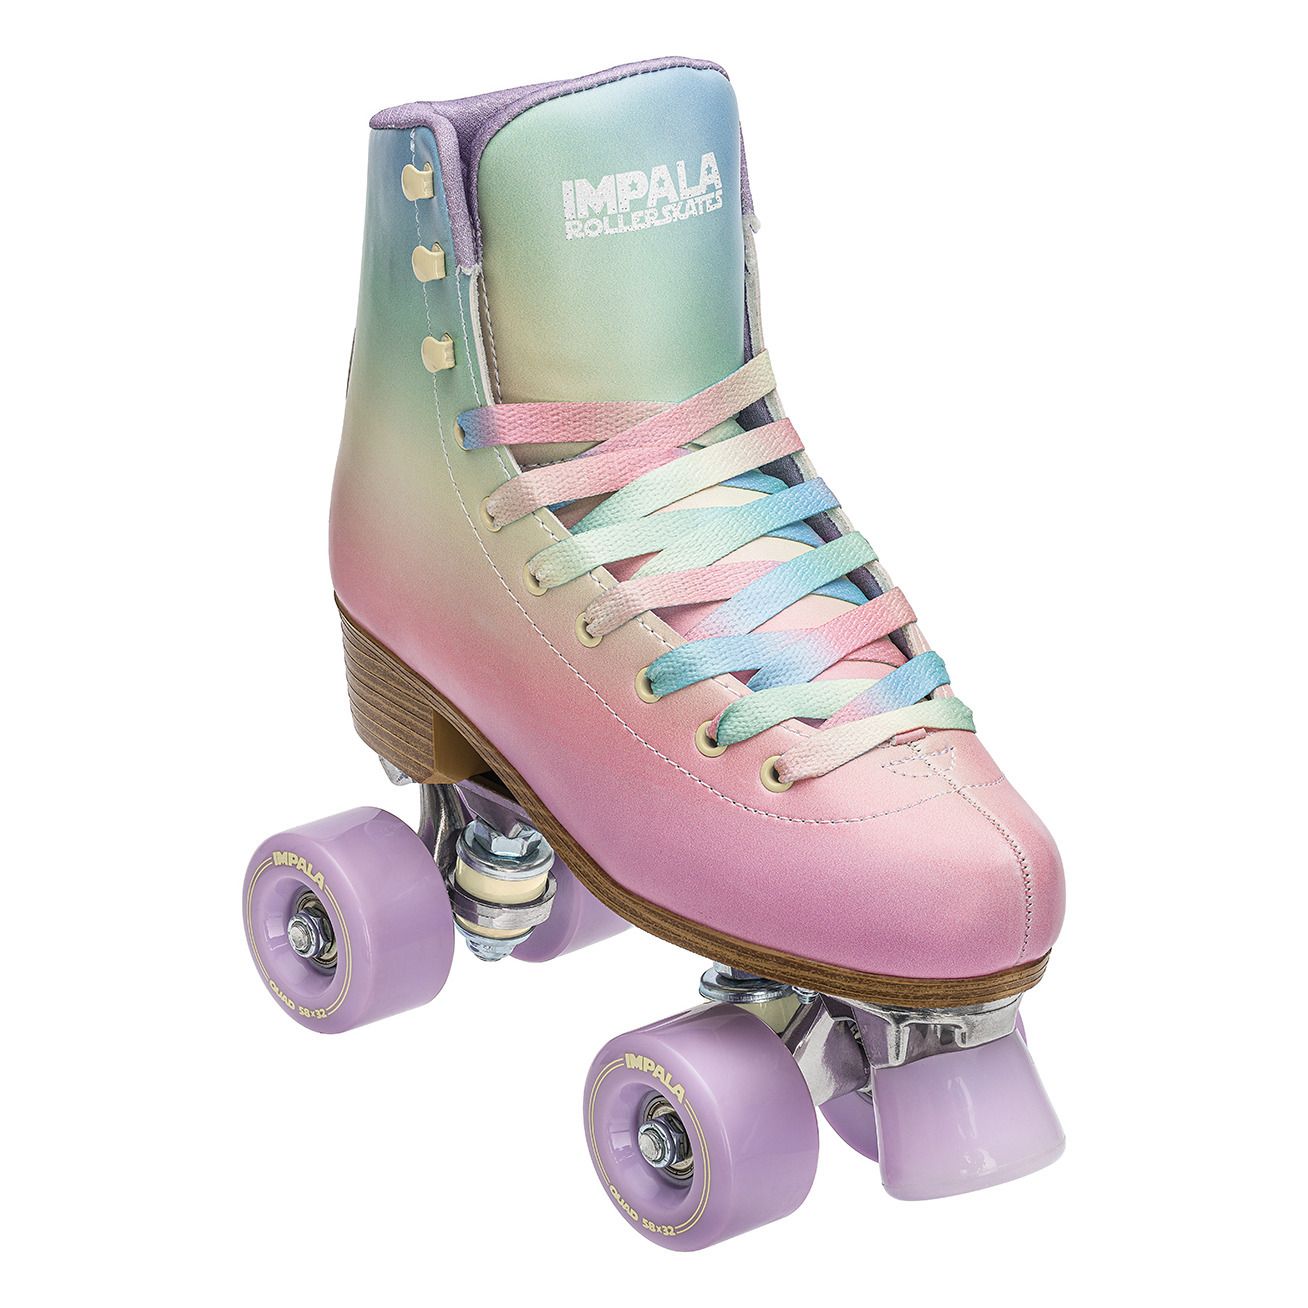 Roller Skates for Women Girls Size 8 Pink Flower for Adults Teenagers and Kids 